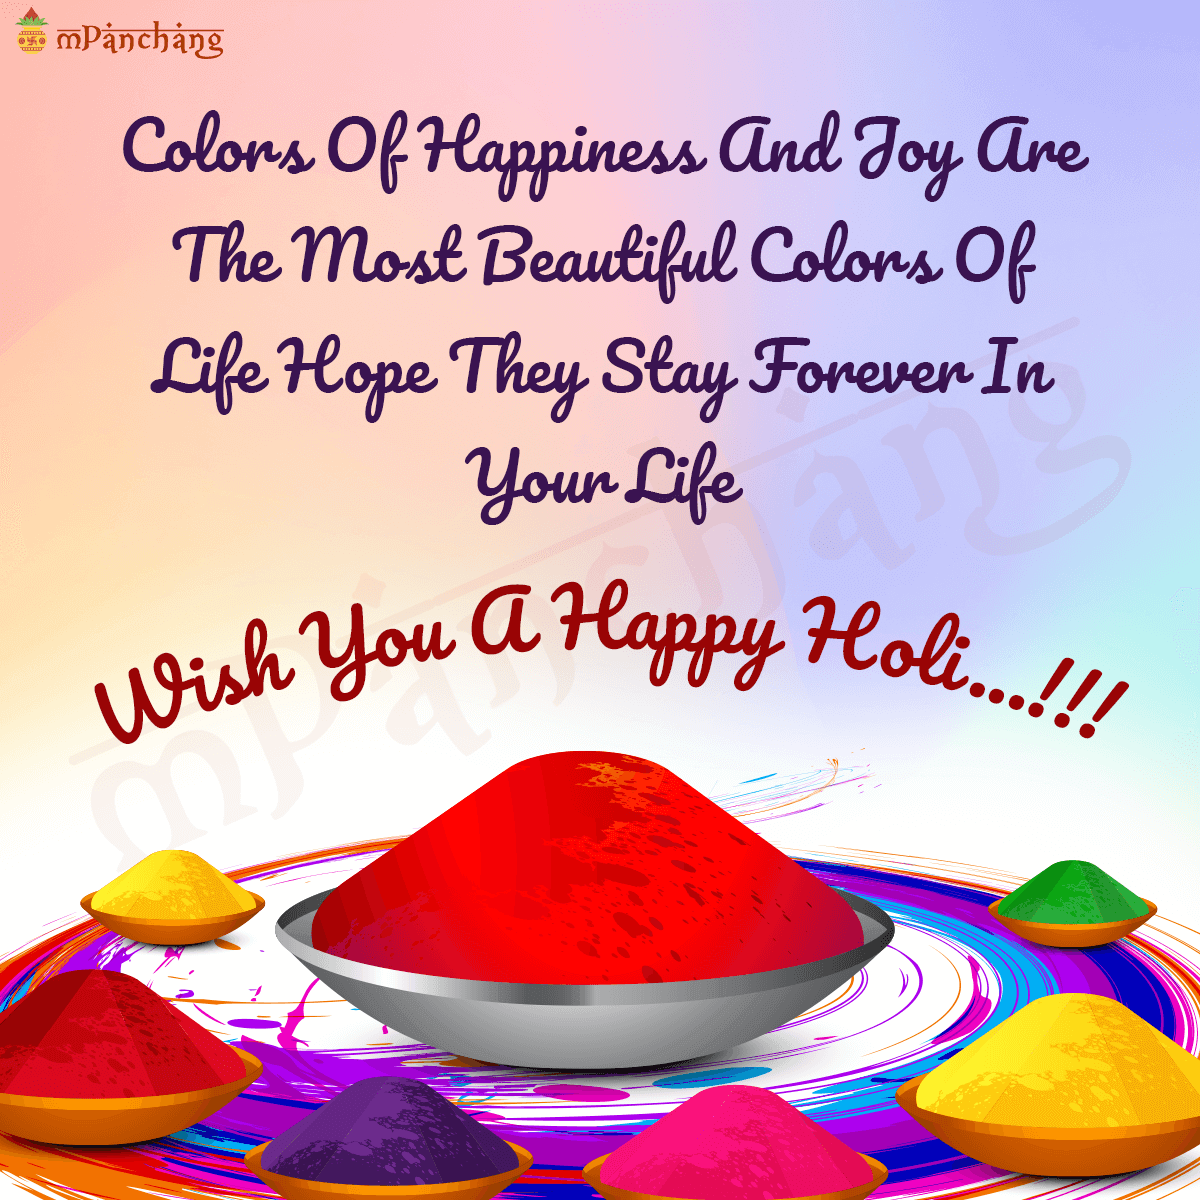 “A Fantastic Compilation of HolI Wishes Images in Full 4K: Over 999+ Options!”